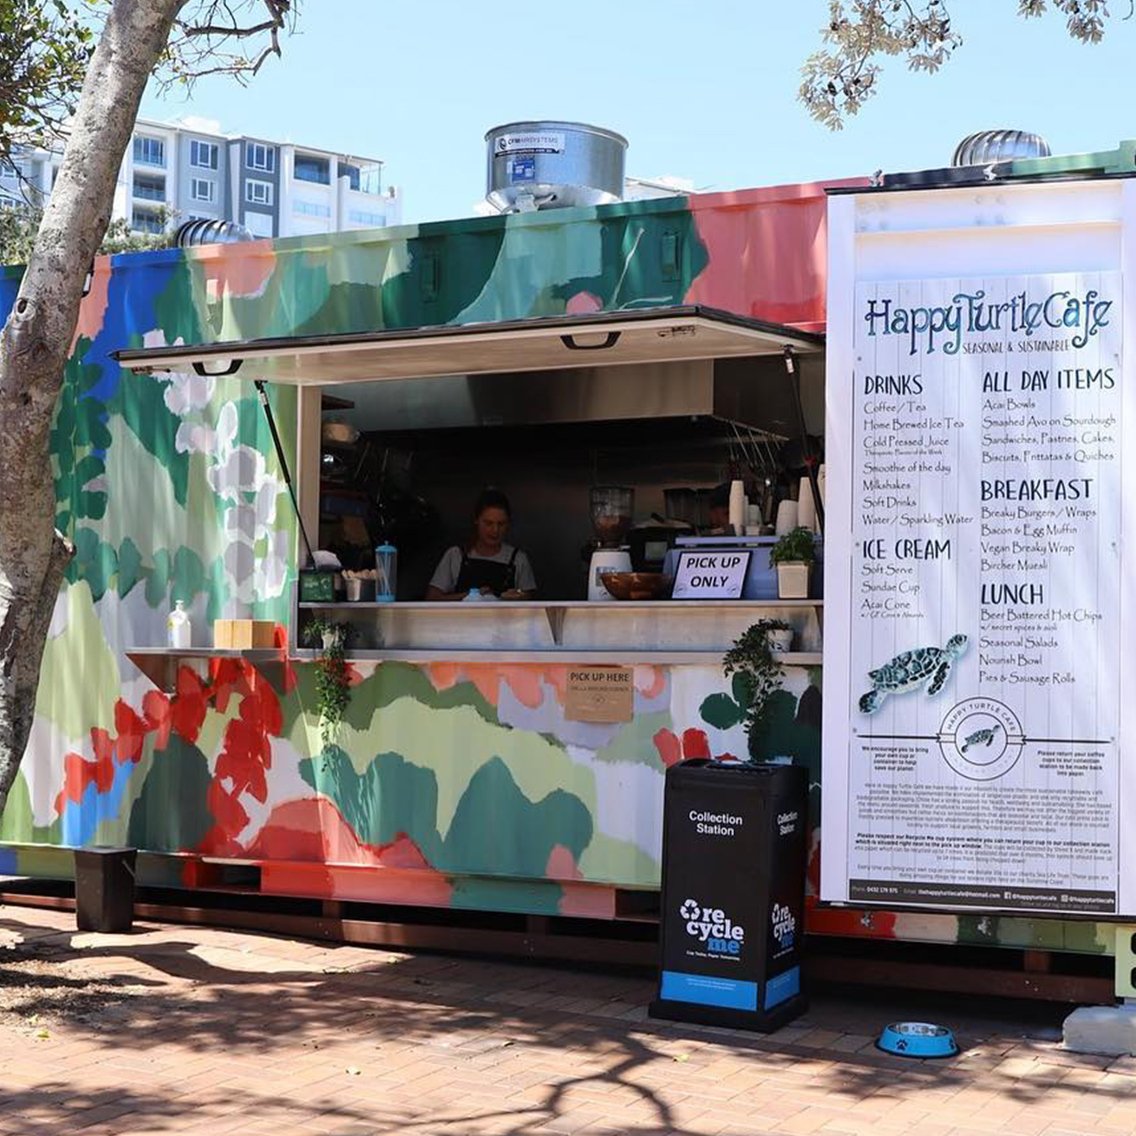 Image from Happy Turtle Cafe of RecycleMe Collection Station